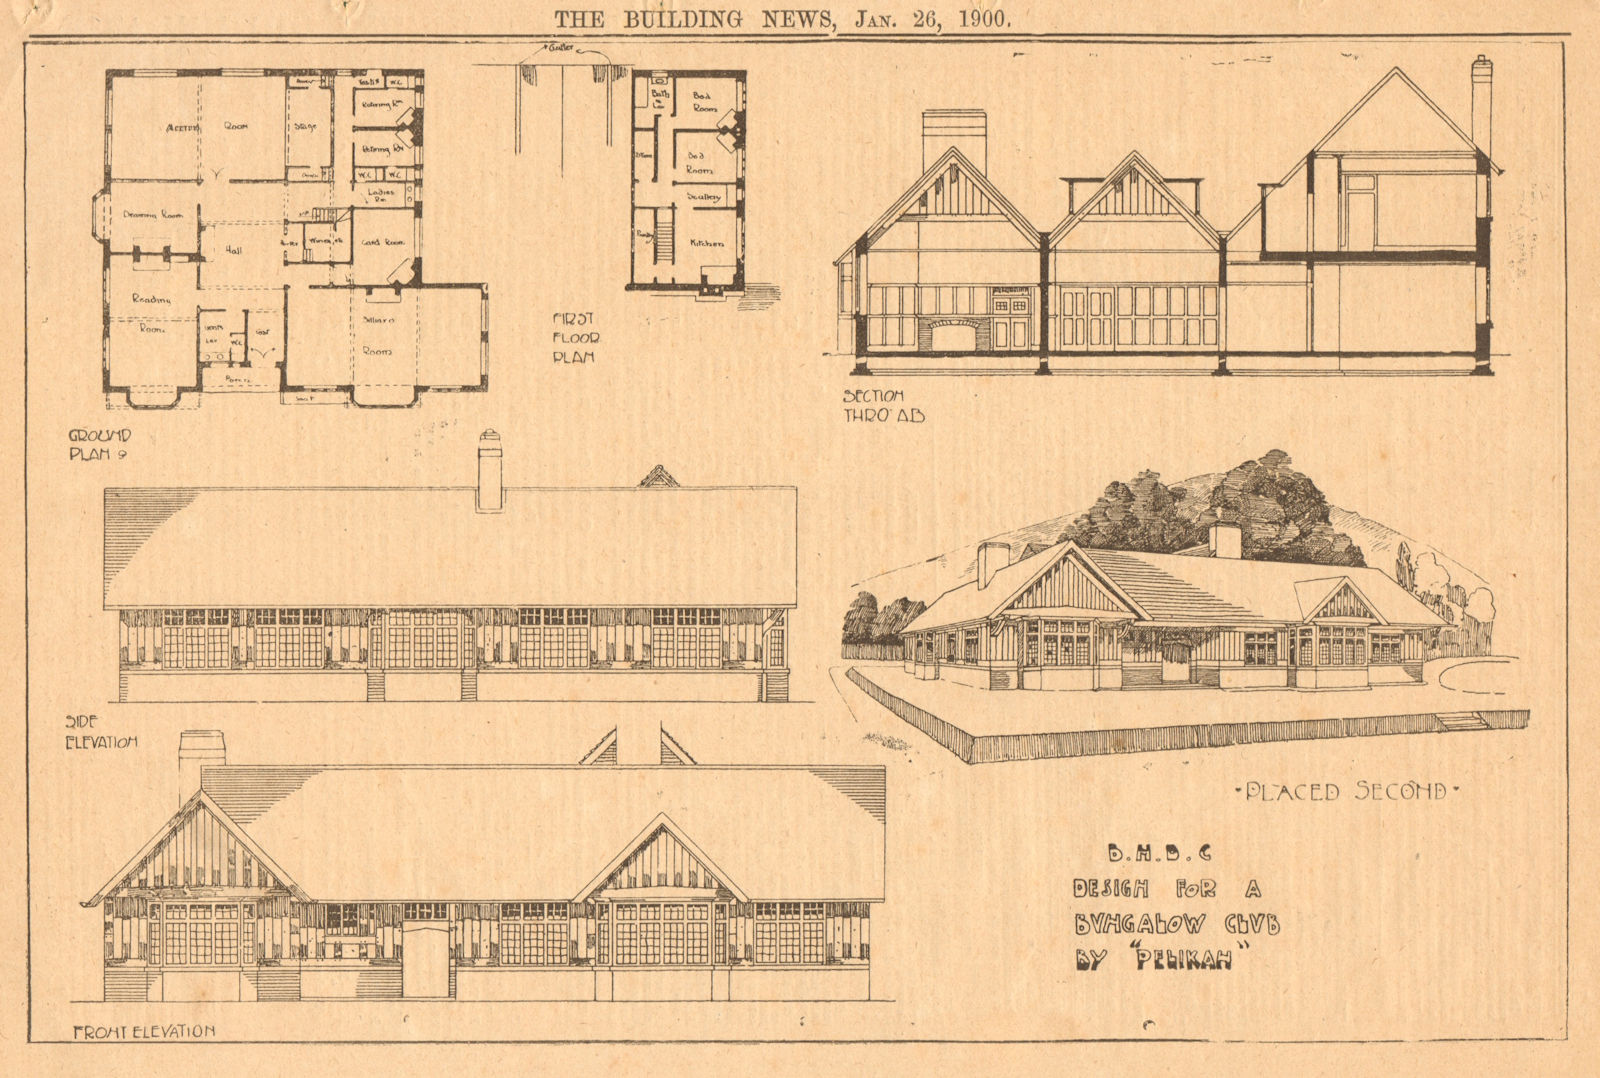 Associate Product Design for a bungalow club by ''Pelikan''. Plans, section & elevations 1900